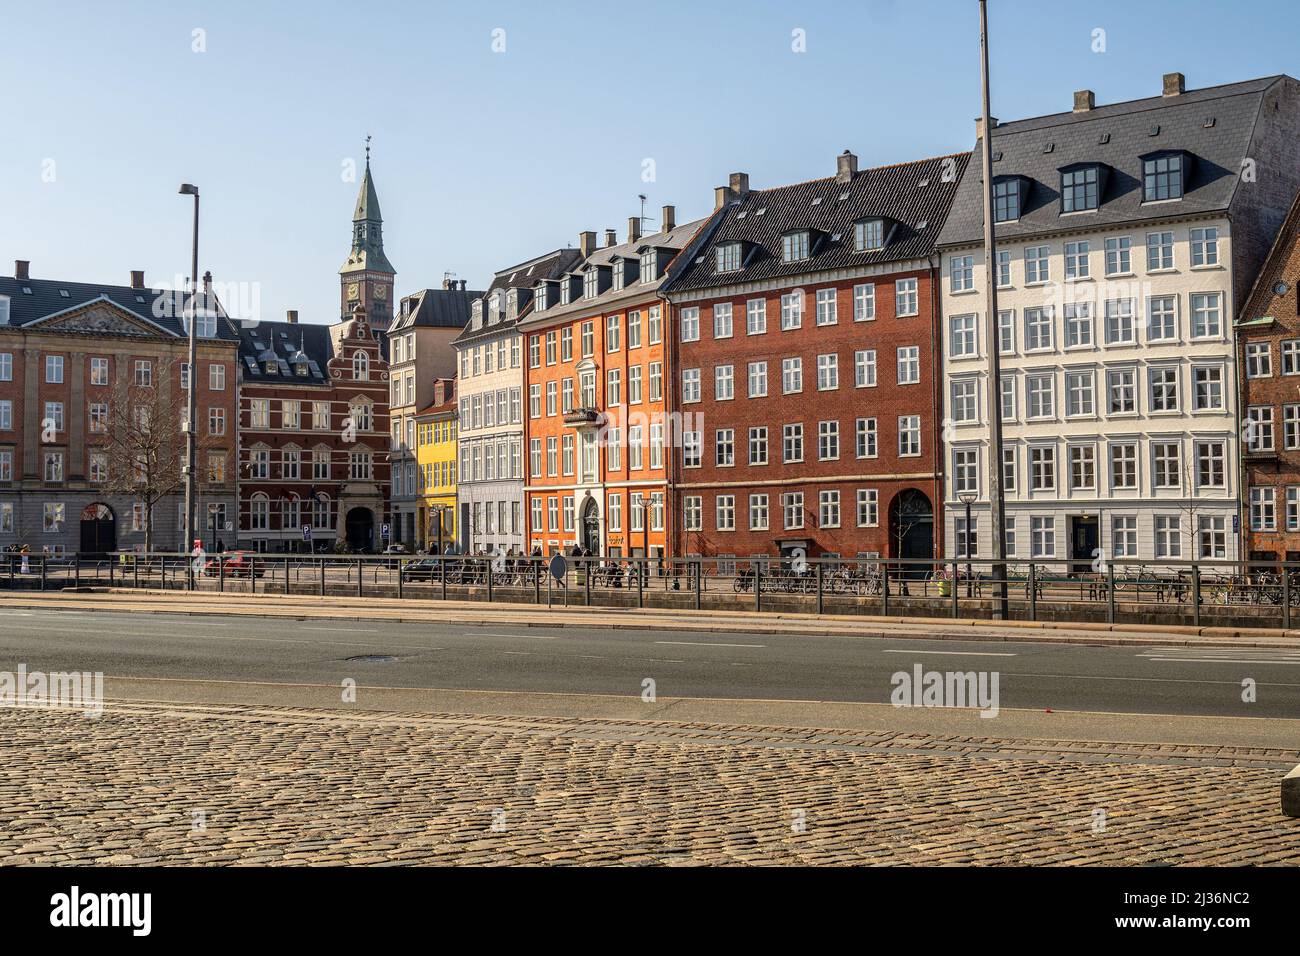 The bell tower of the city hall stands out among the colorful facades of the typical buildings of the old town of Copenhagen. Stock Photo